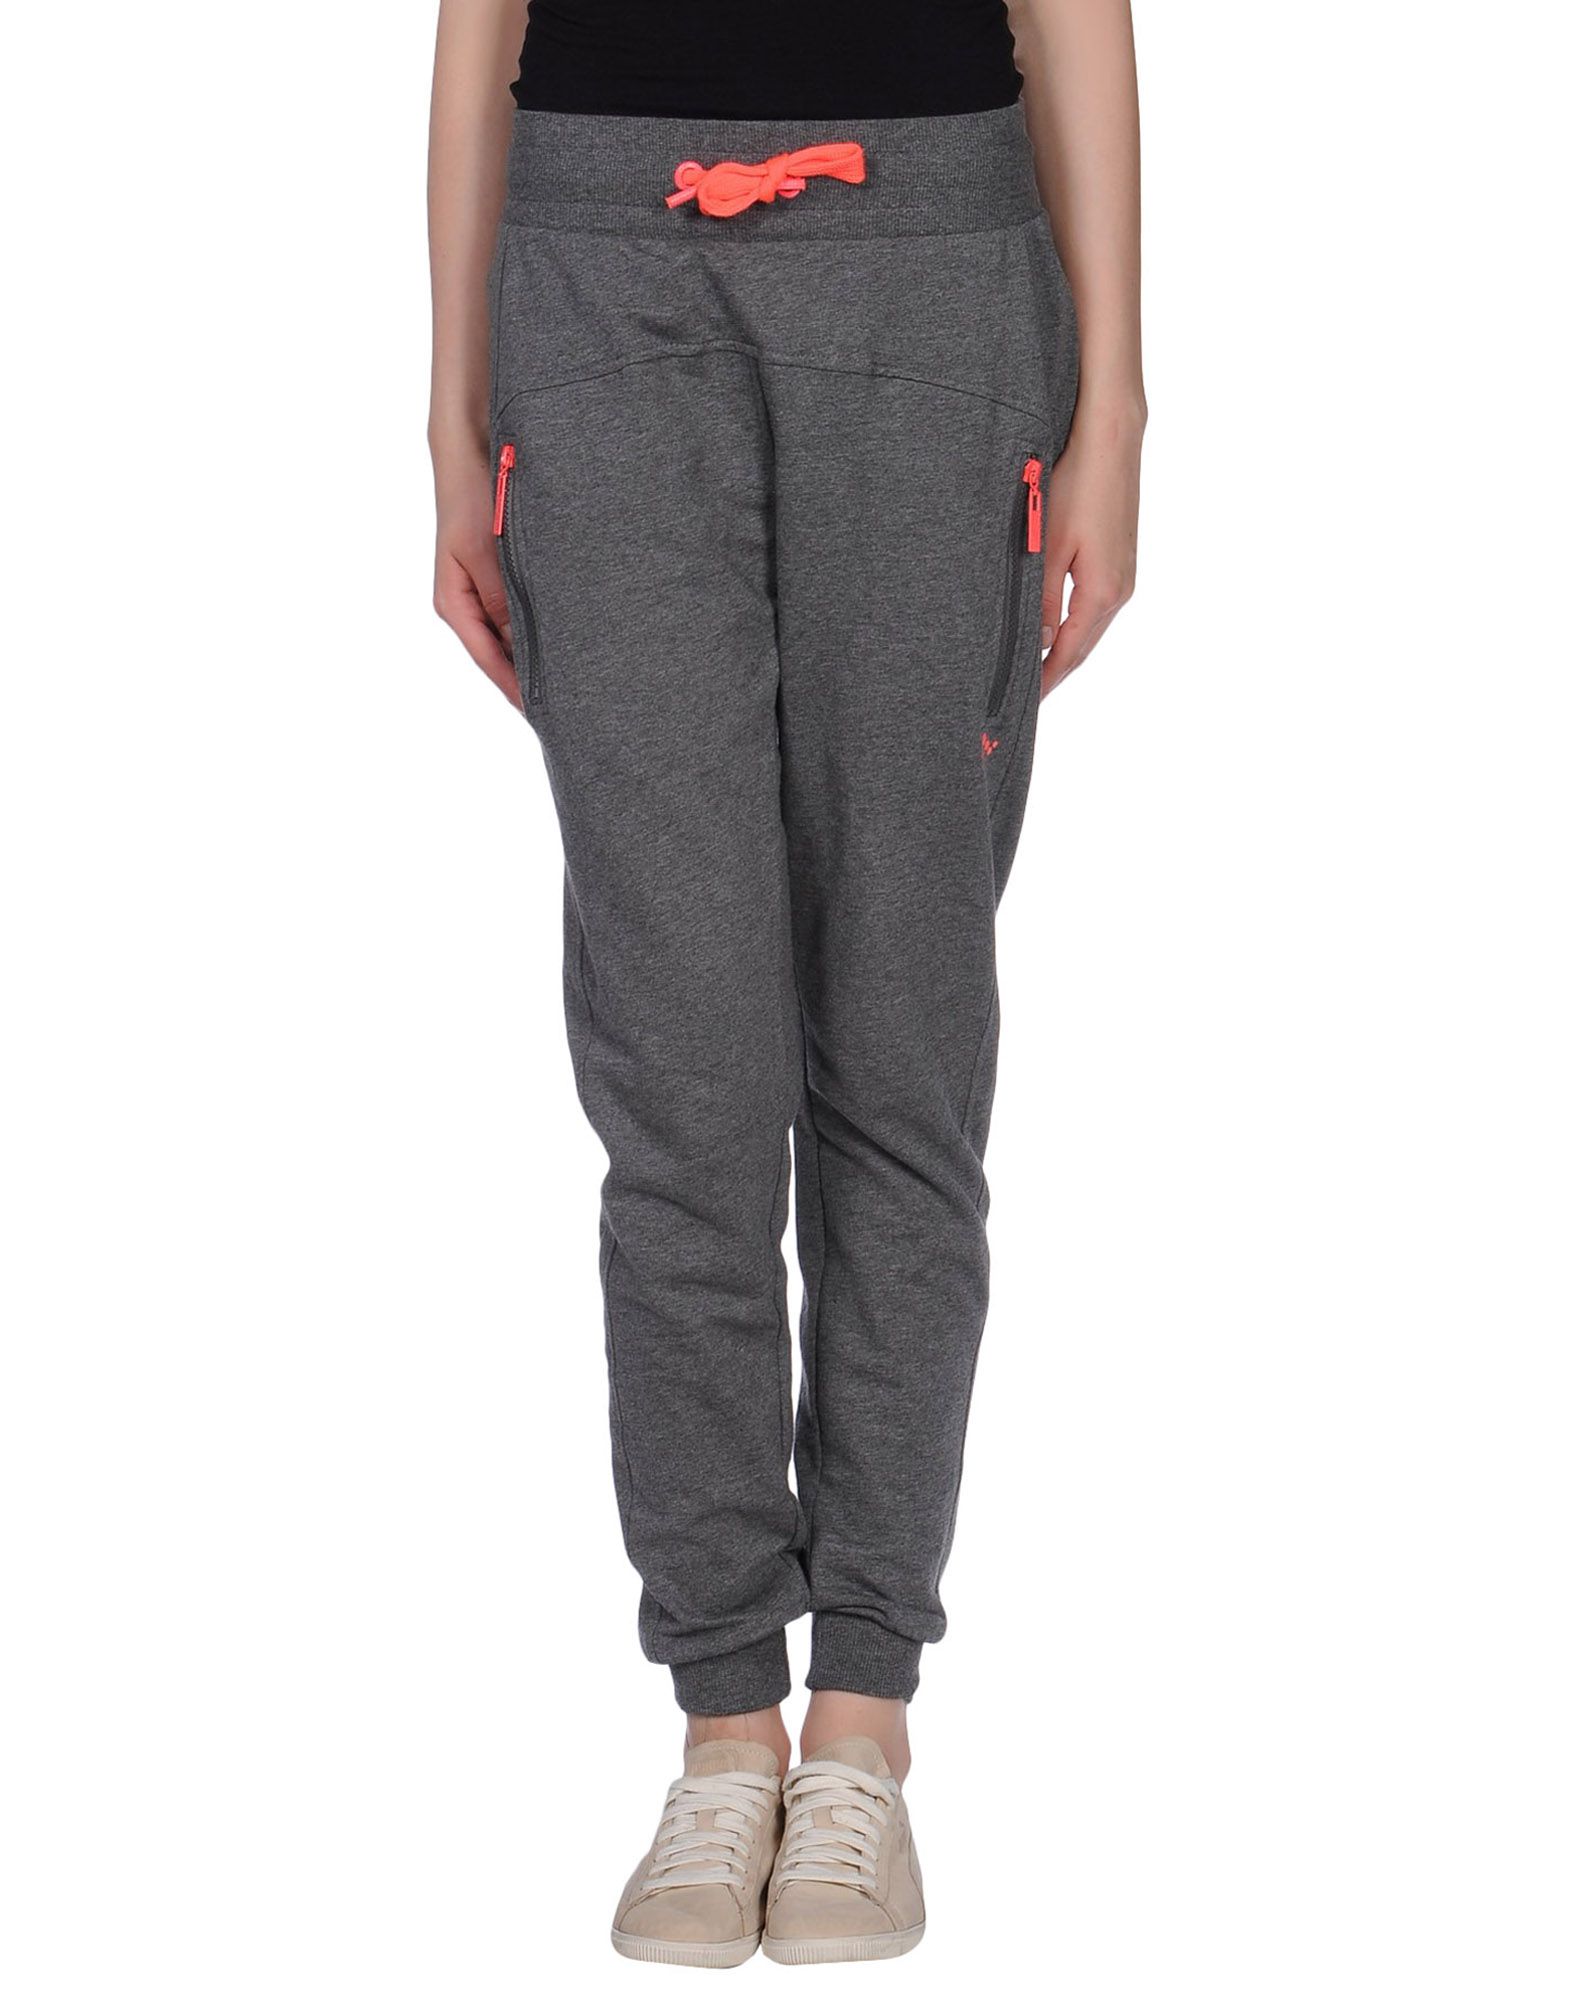 Foto Only Play Pantalones Deportivos Mujer Gris